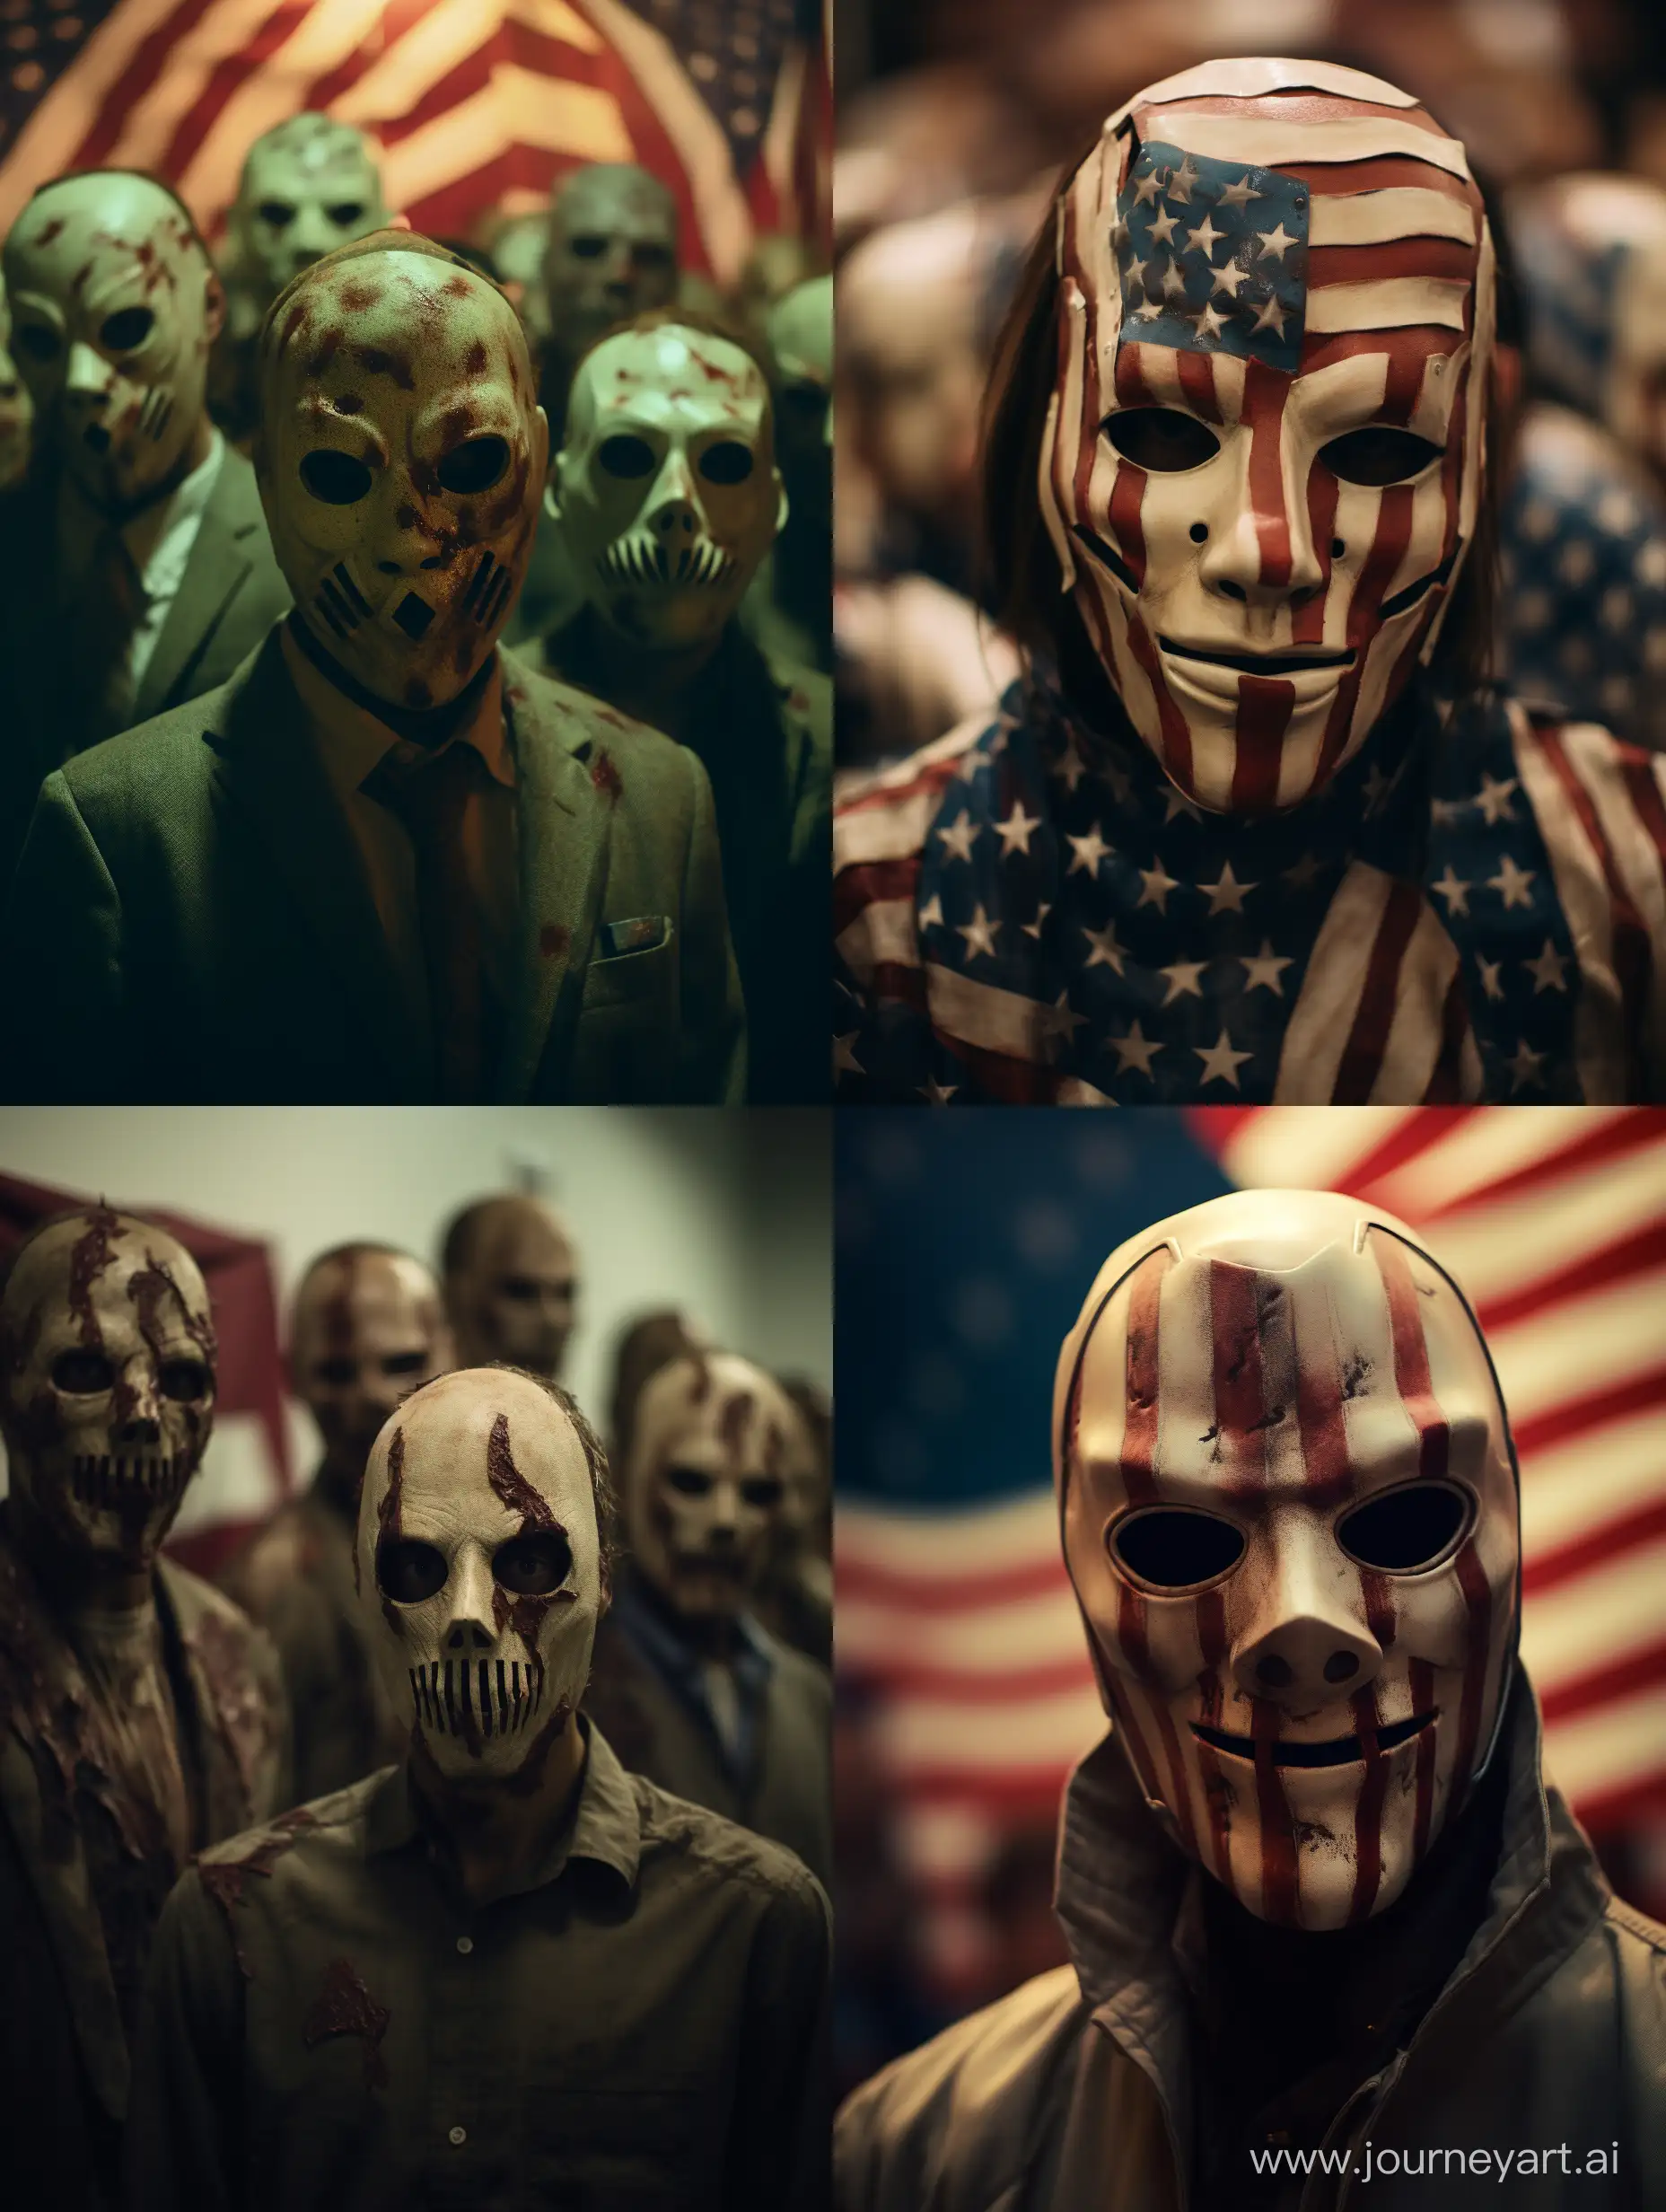 Epic-Cinematography-in-The-Purge-Psychotic-Unhinged-Atmosphere-Captured-with-Nikon